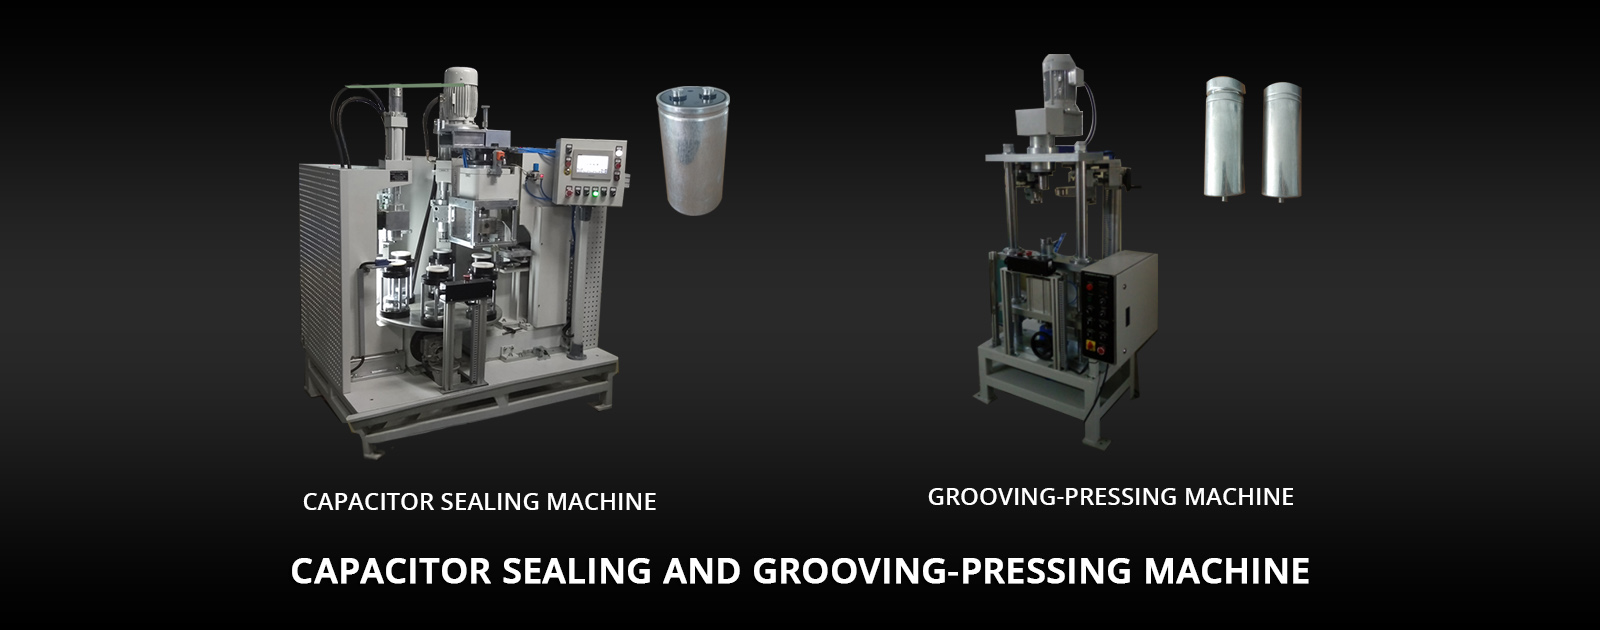 capacitor sealing and grooving pressing machine